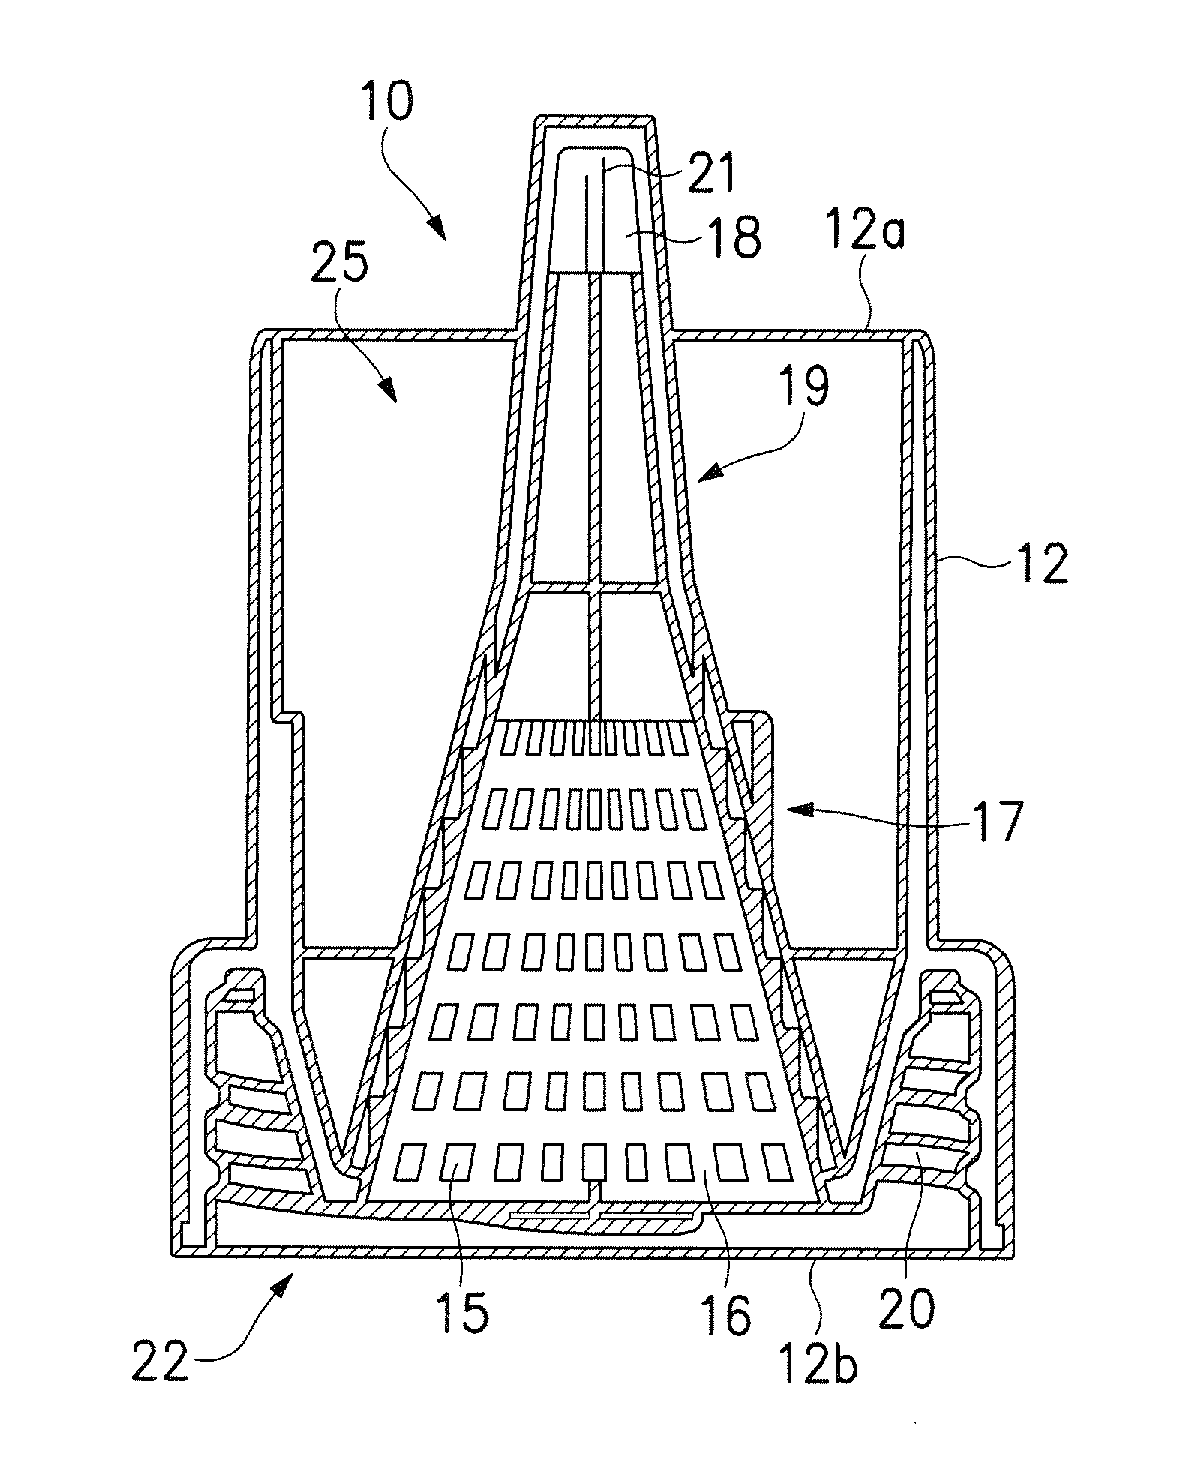 Apparatus and method for filtering biological samples